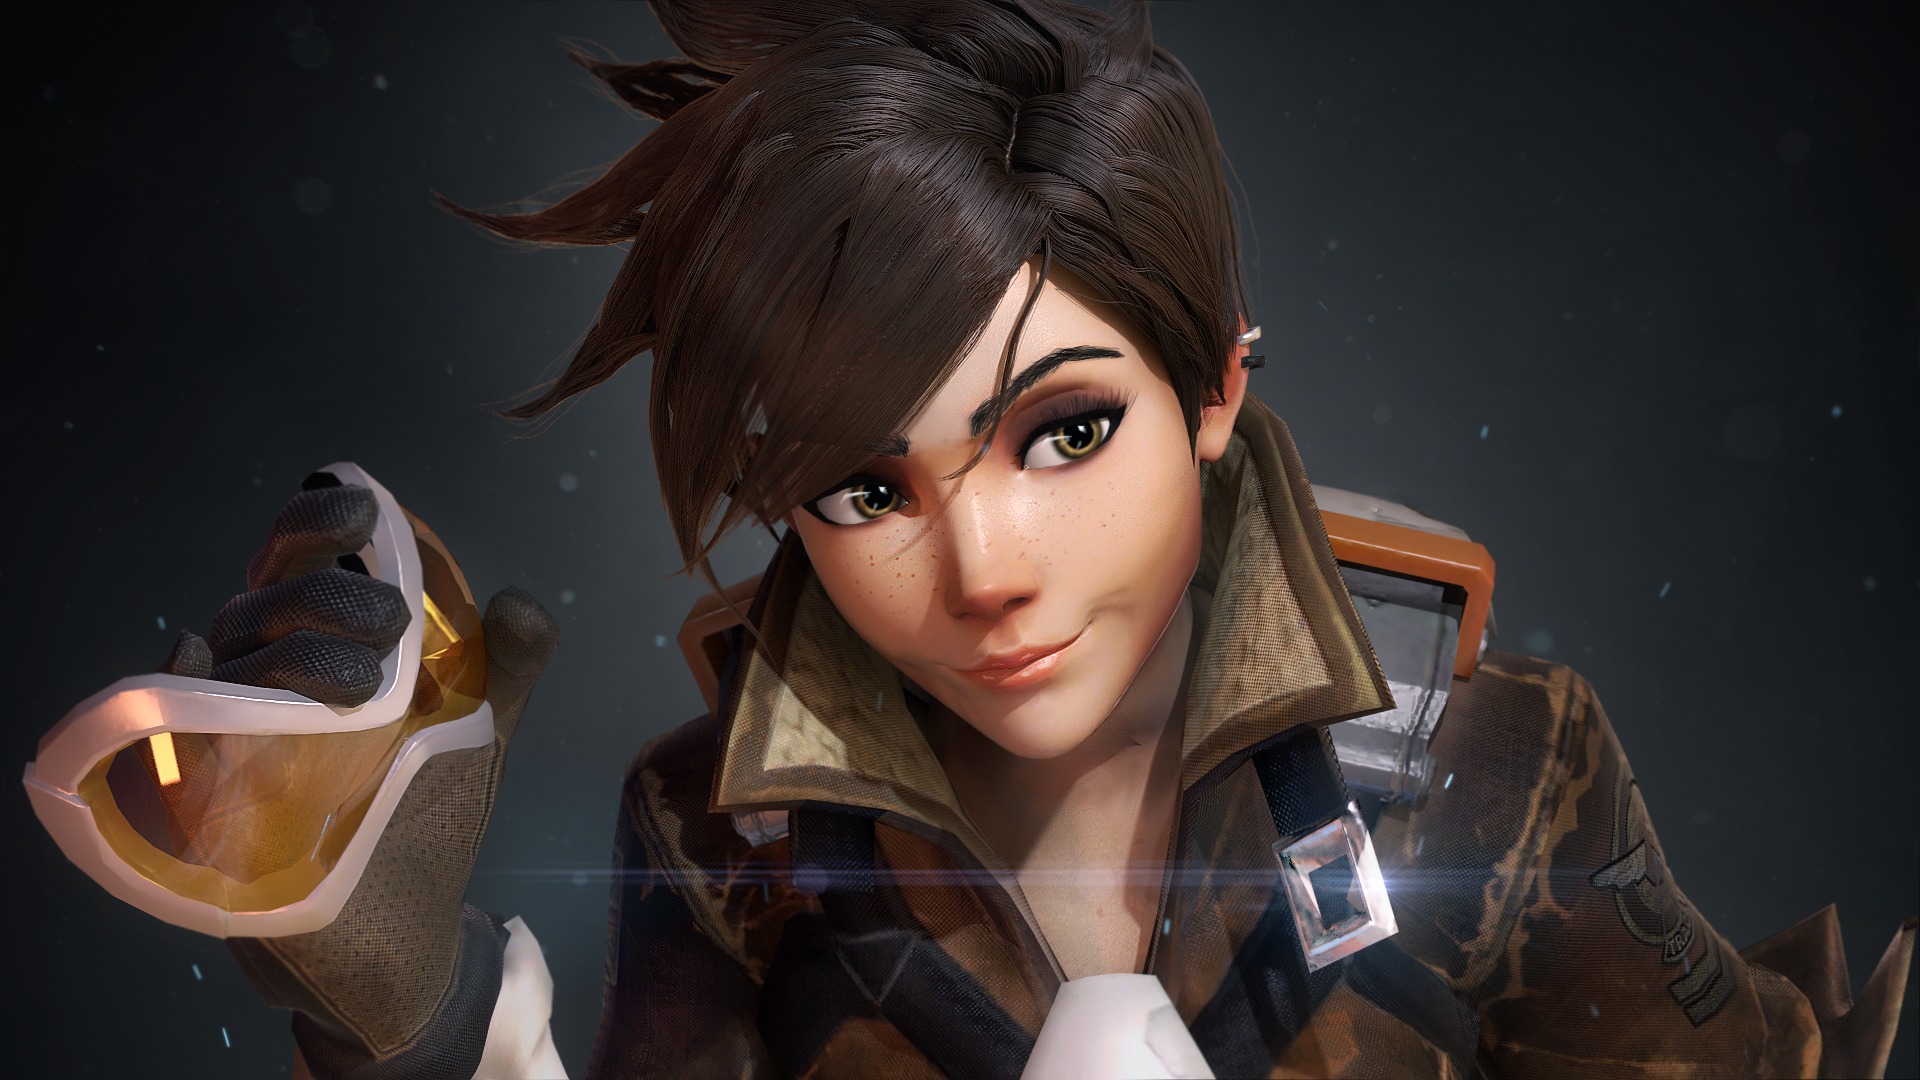 Wallpaper Game, Blizzard Entertainment, Overwatch, Tracer for 